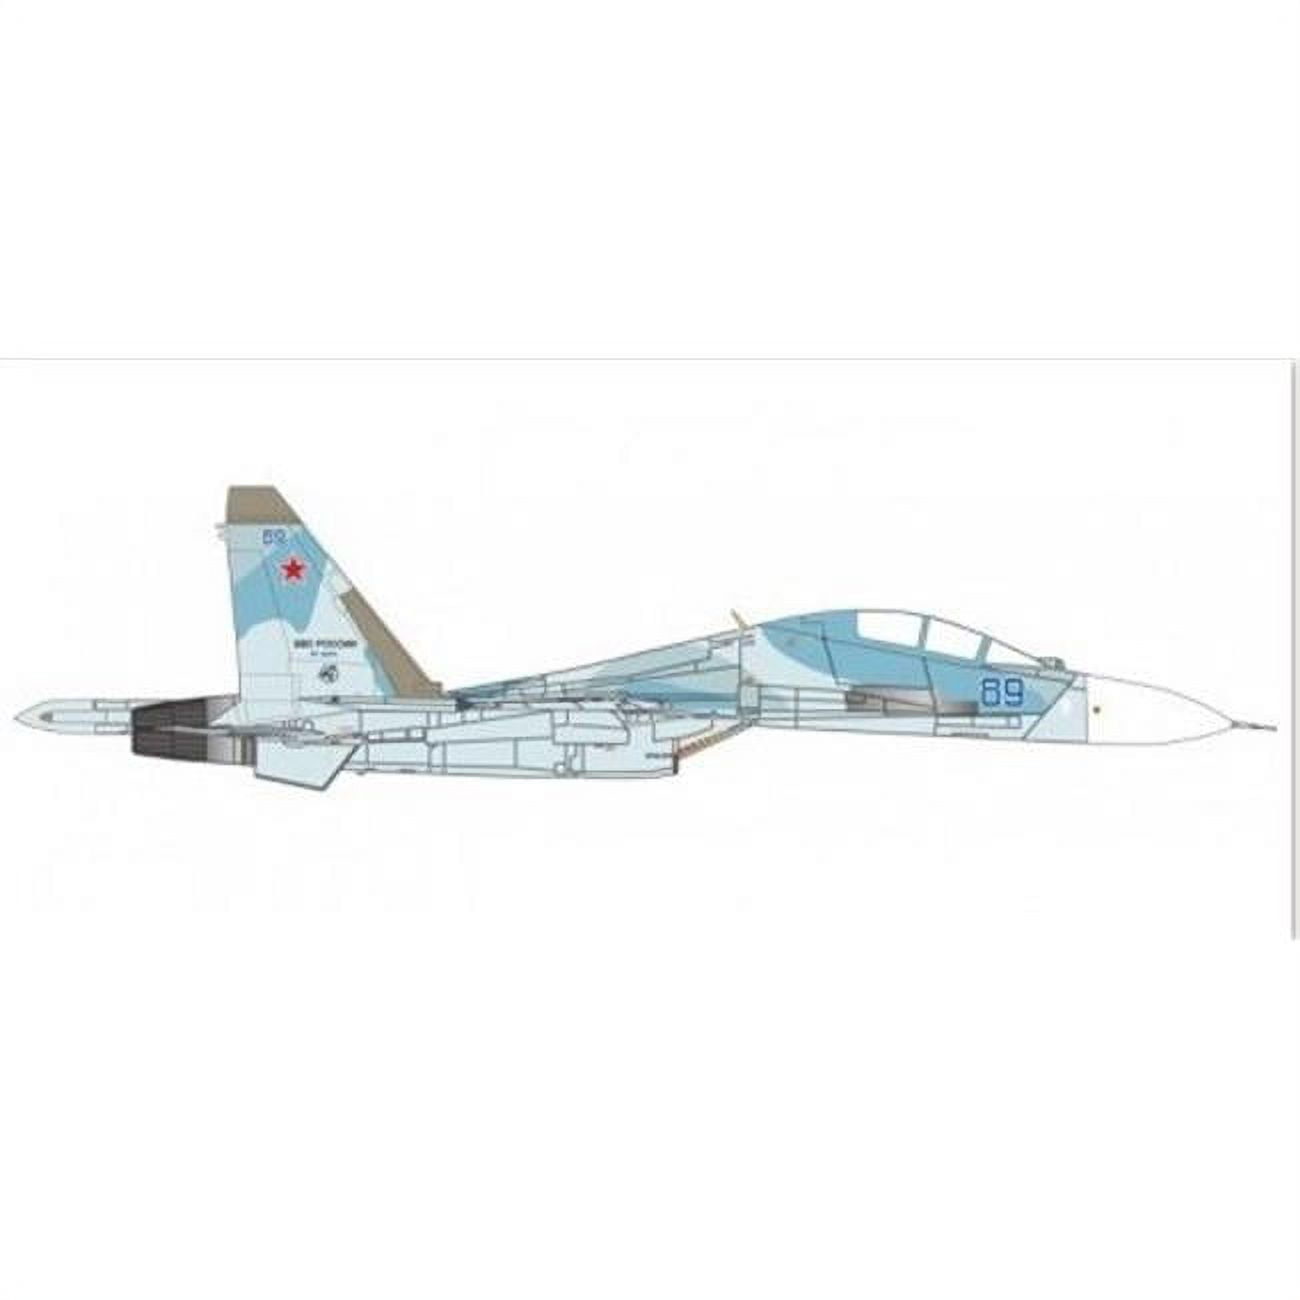 He580311 1 Isto 72 Russian Air Force Su30m2 Model Planes